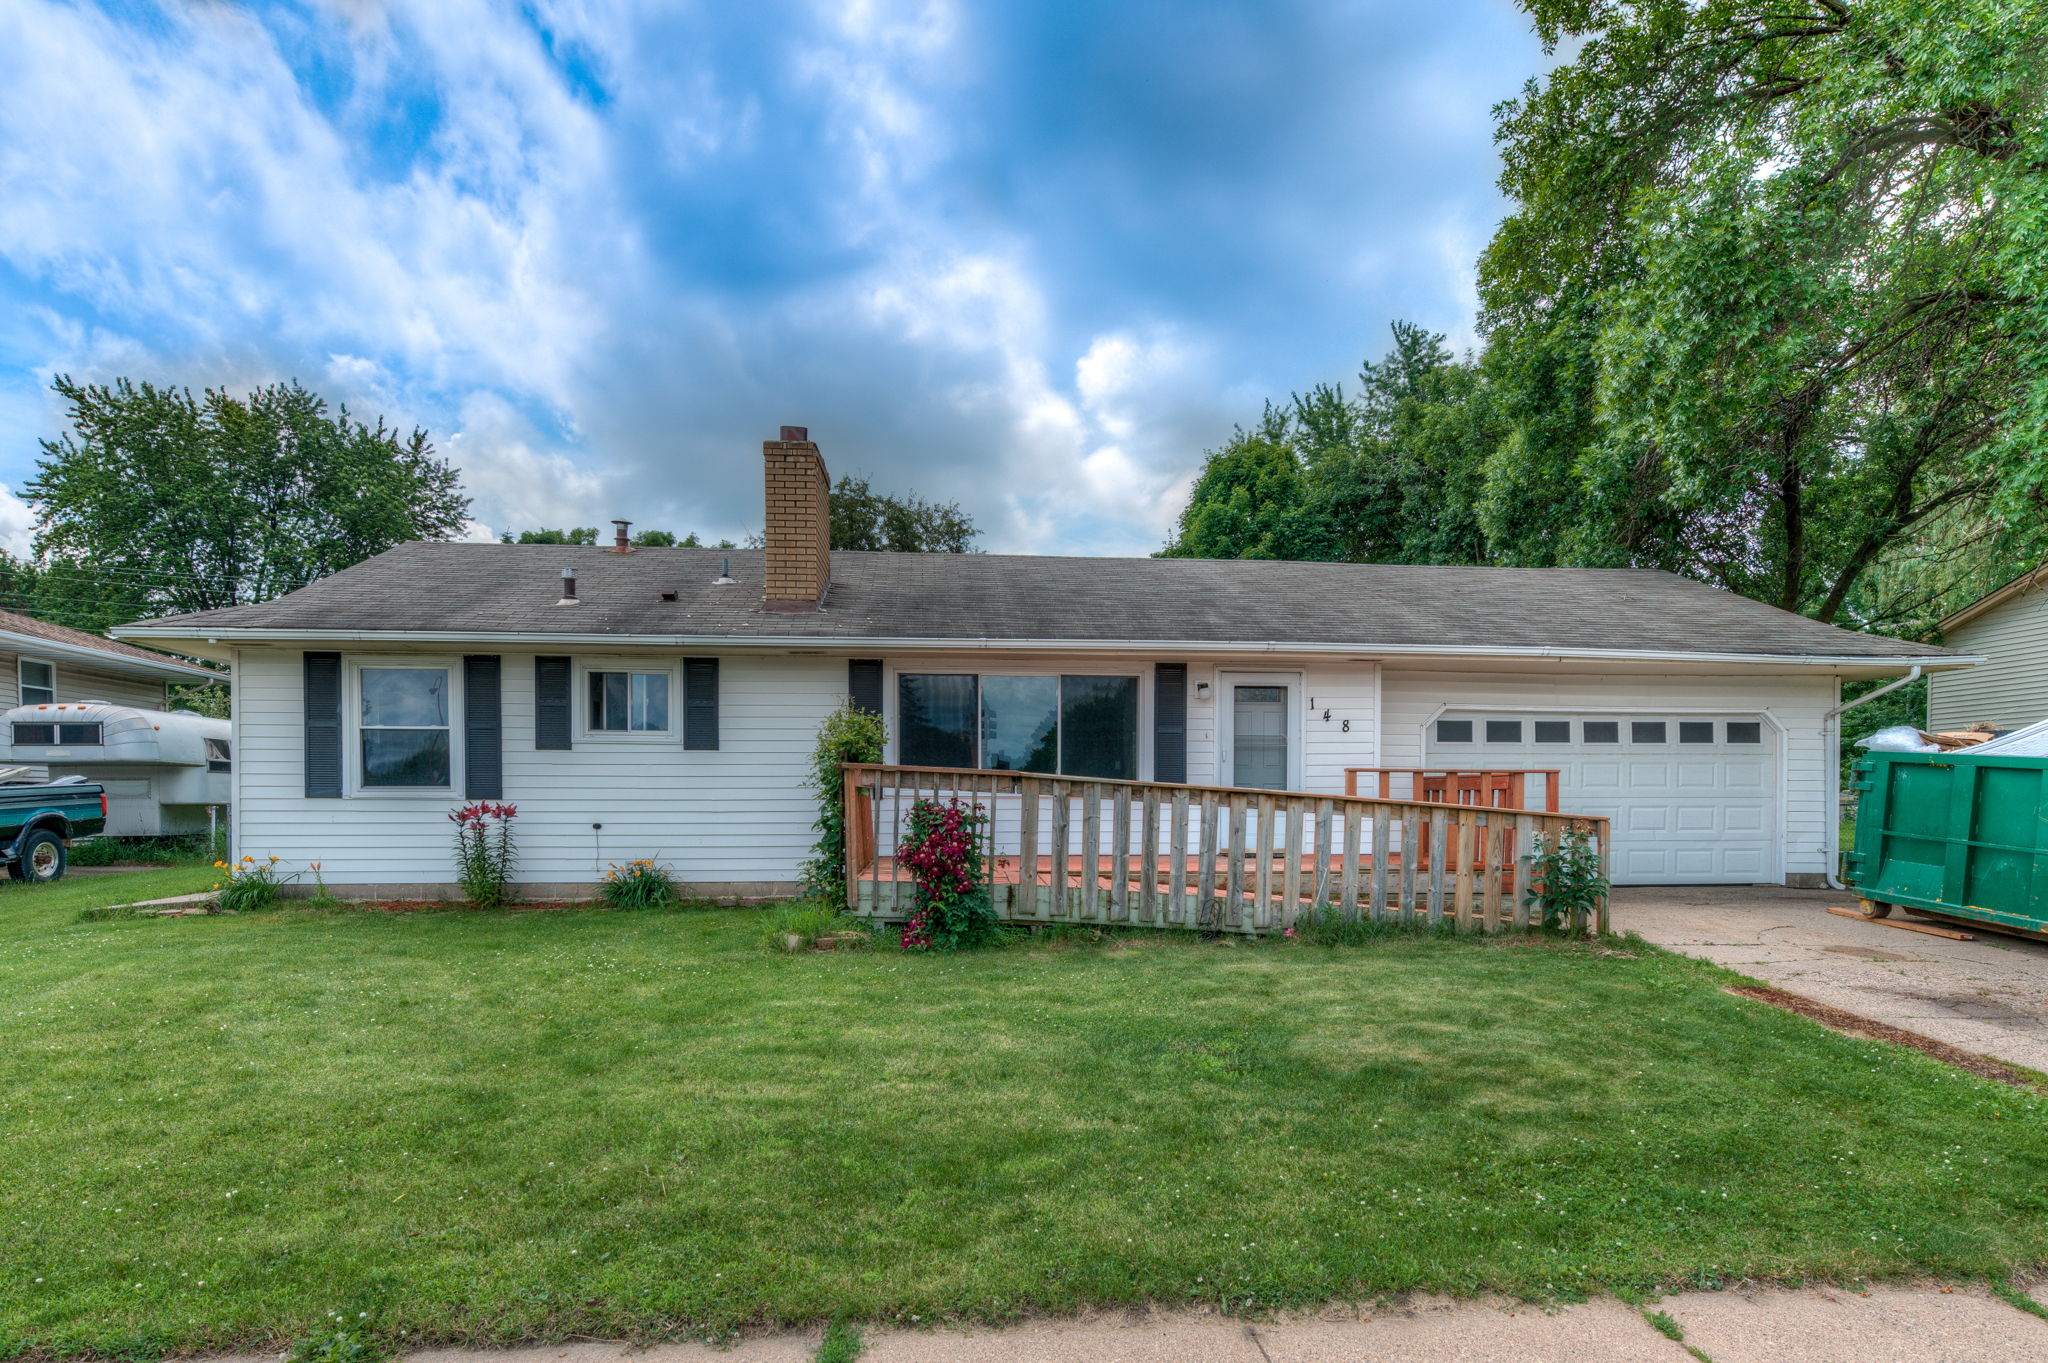  148 County Road 42, Apple Valley, MN 55124, US